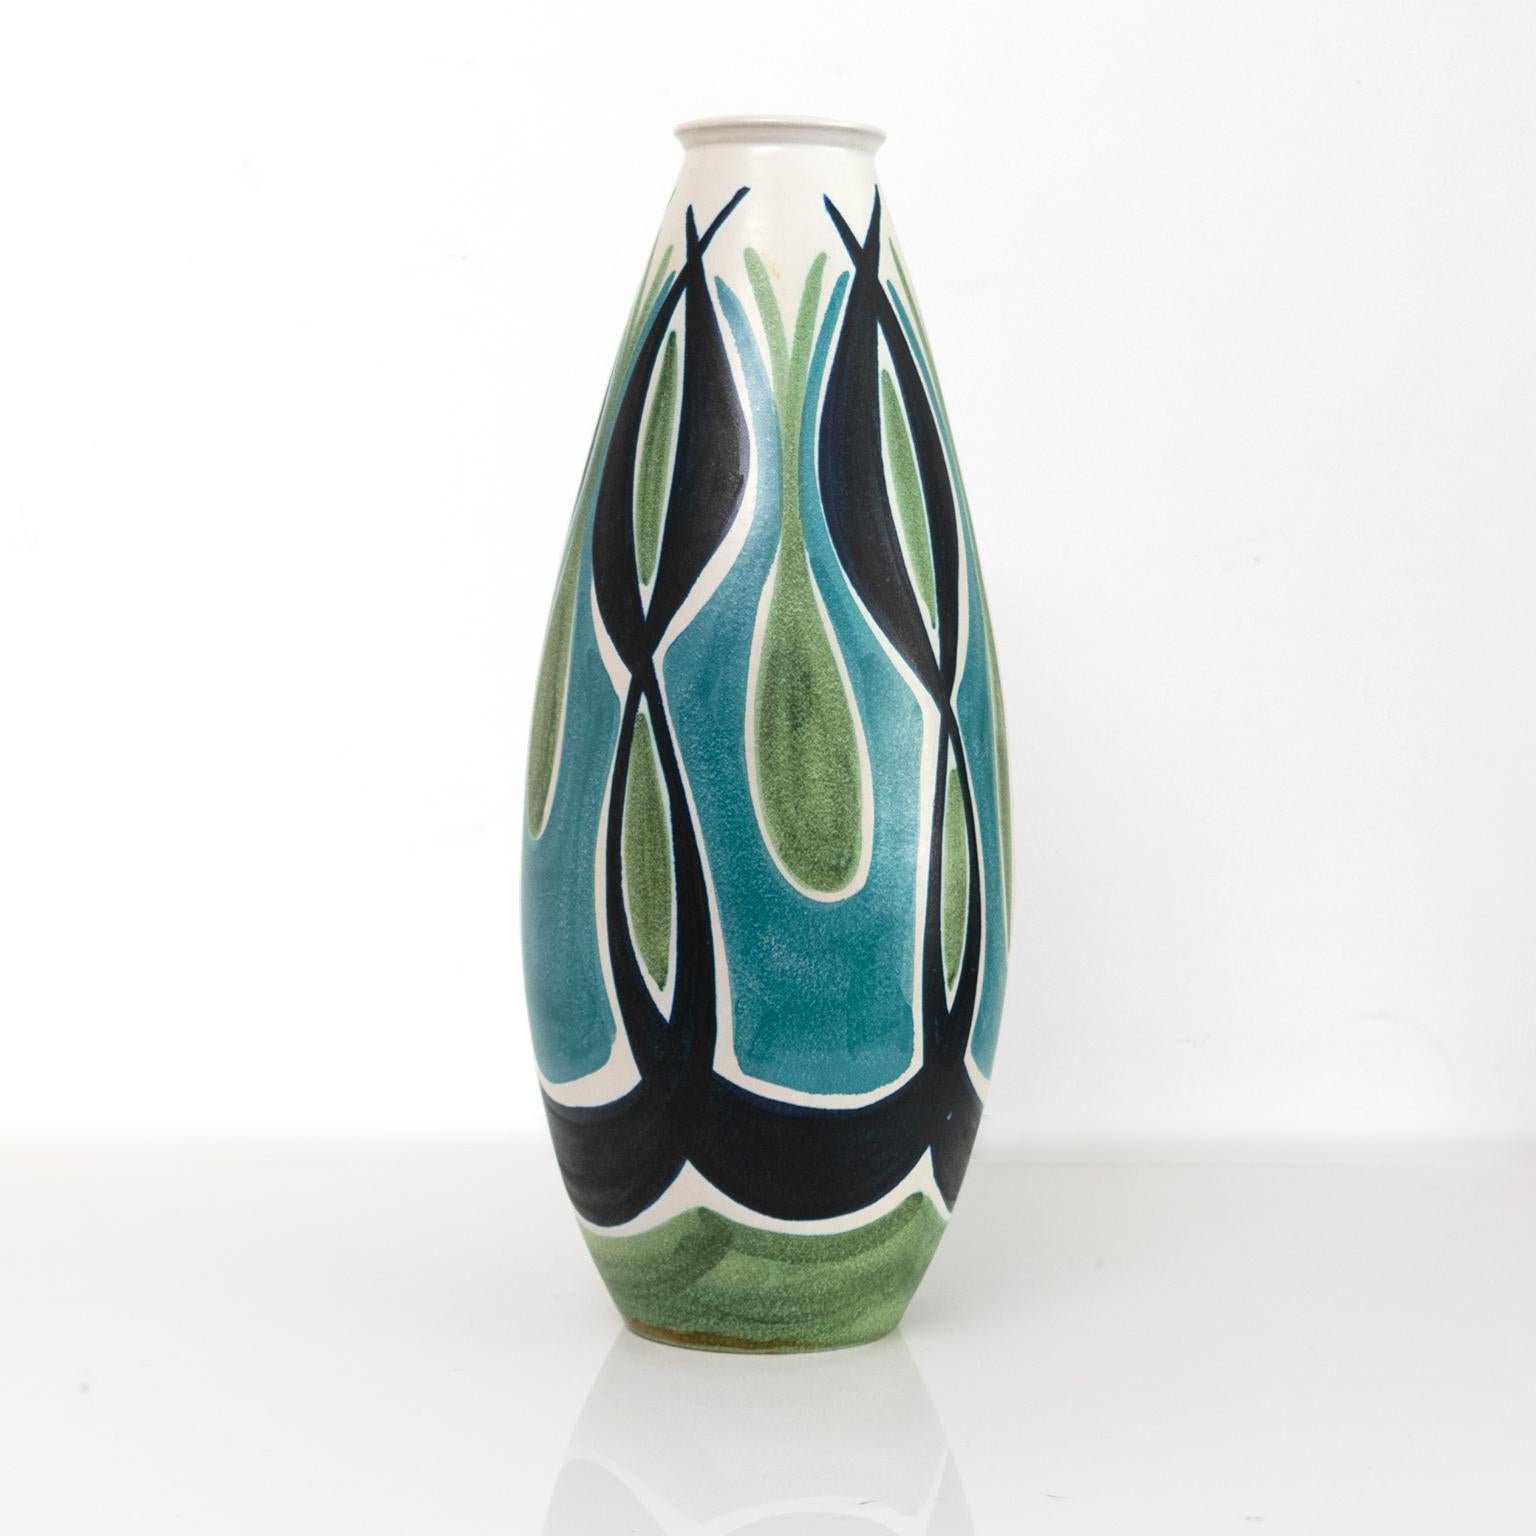 Large Scandinavian Modern ceramic vase with abstract in blue and green design by Mette Doller and form designed by Ivar Ericsson for Hoganas, Sweden.